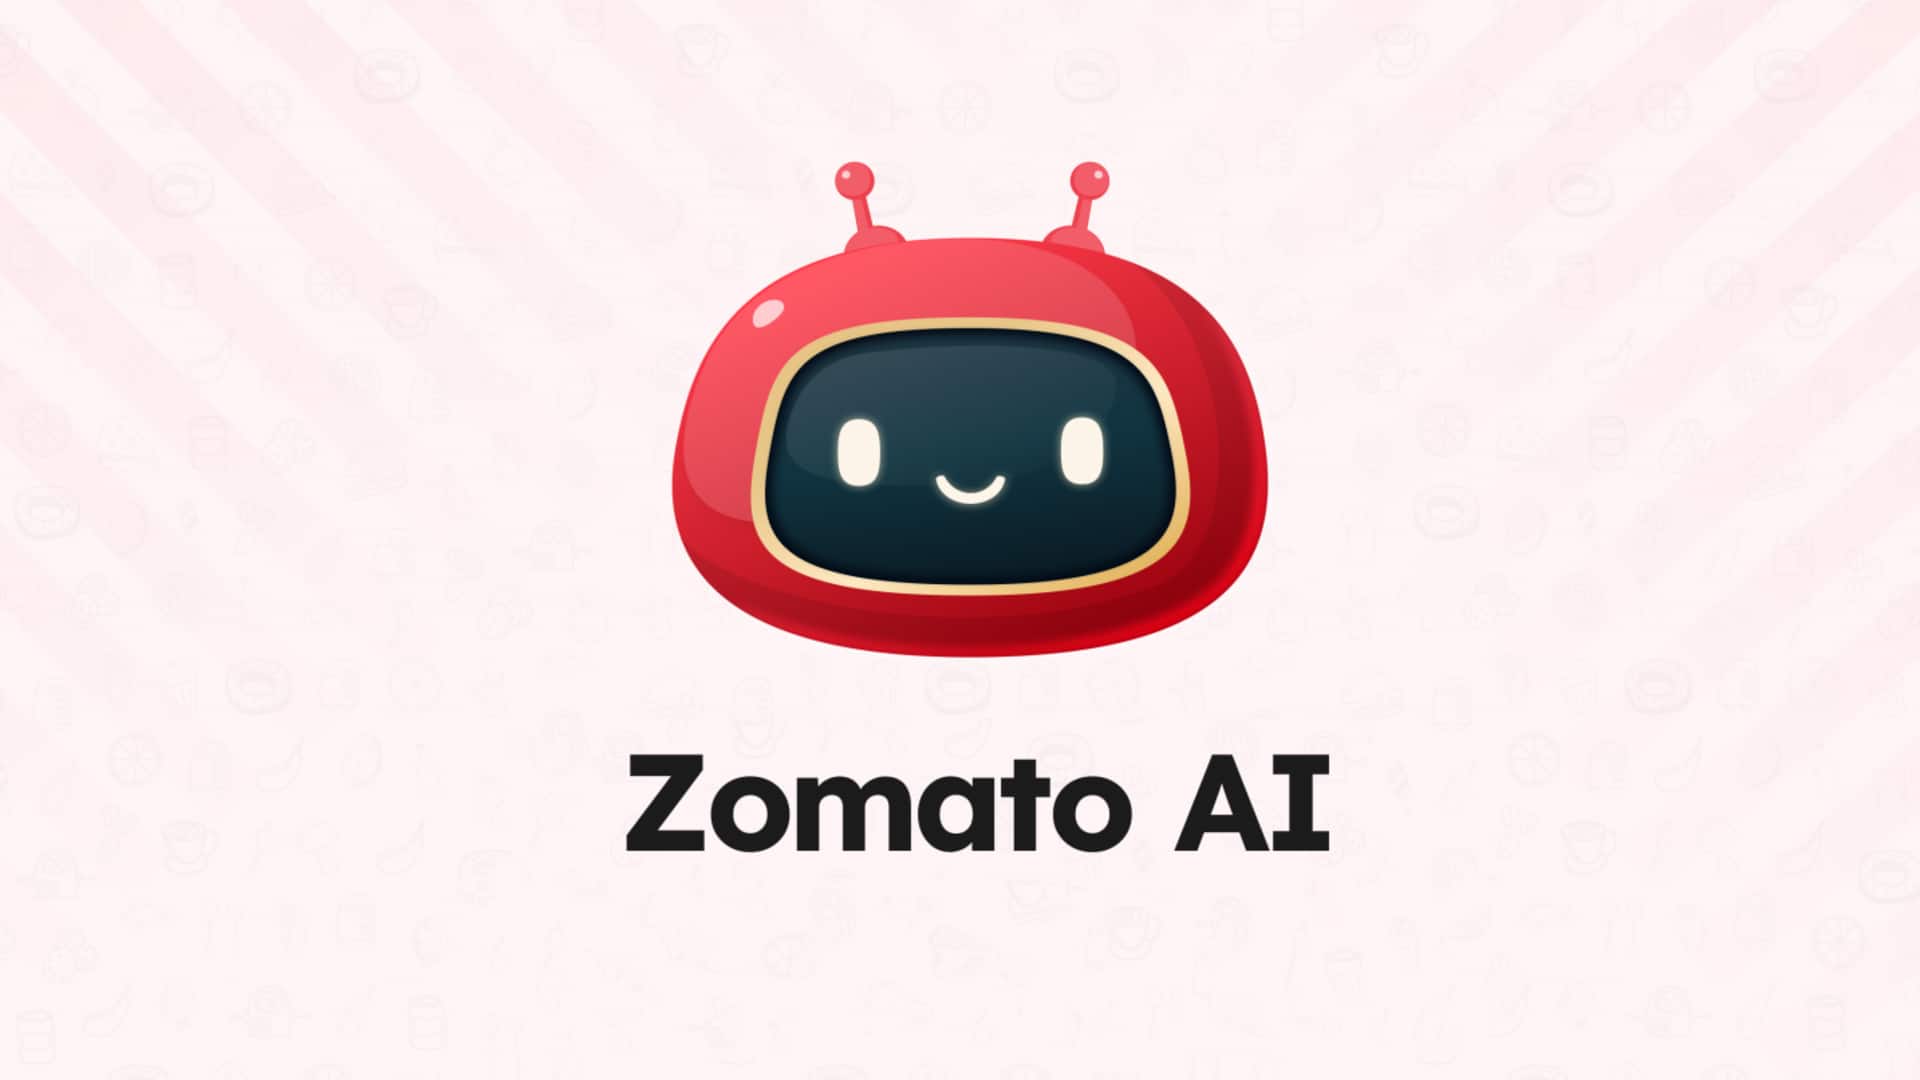 Meet Zomato AI, expert companion for personalized food orders